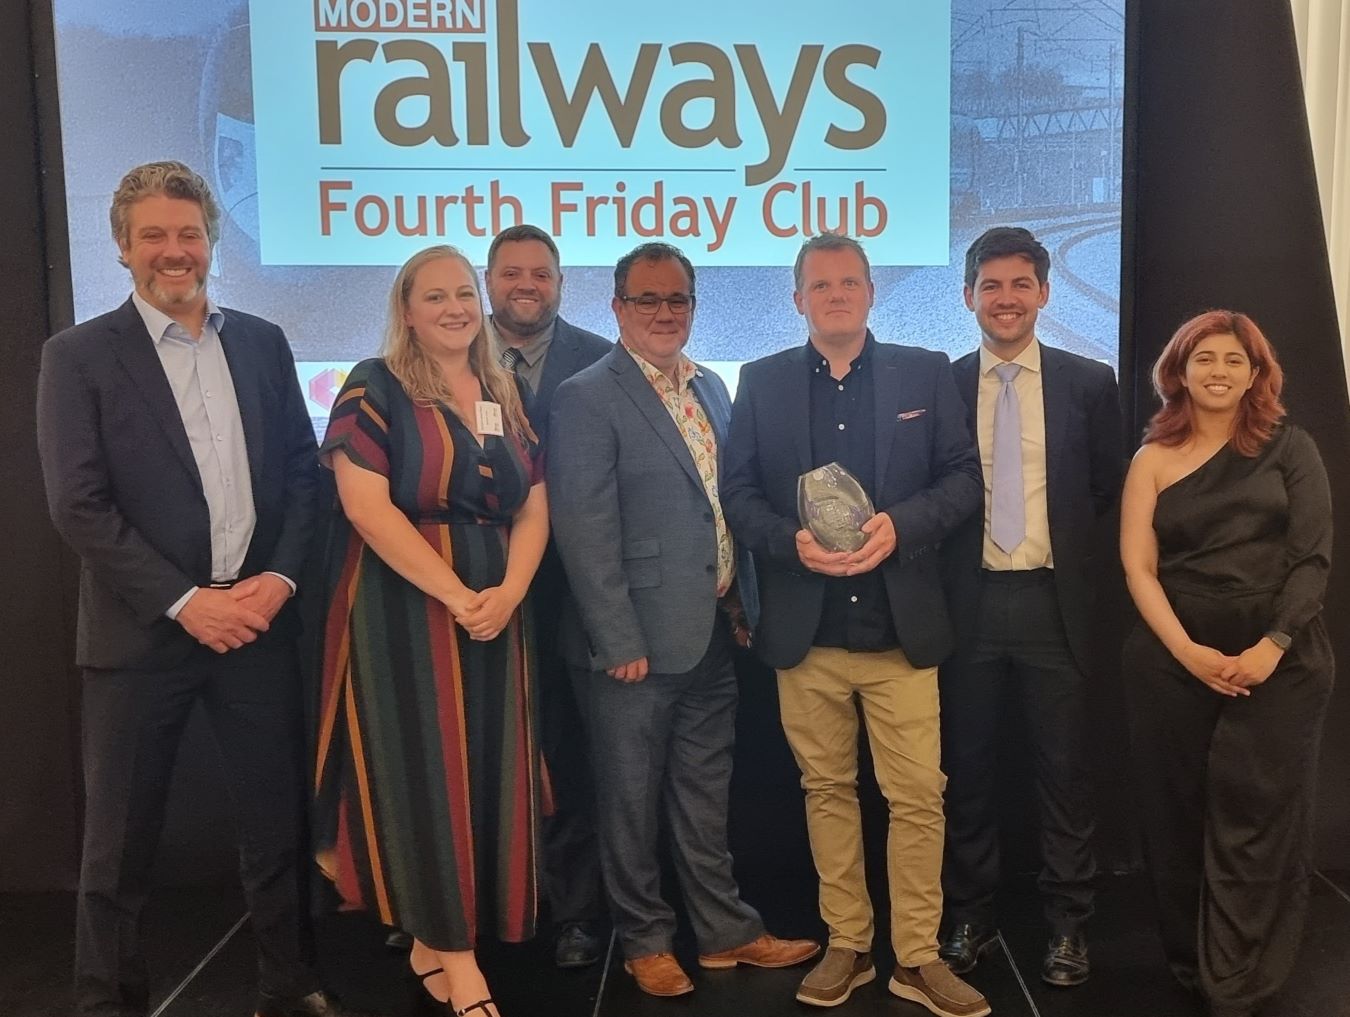 Belvoir Rail join Northern Trains to Collect Innovation Award